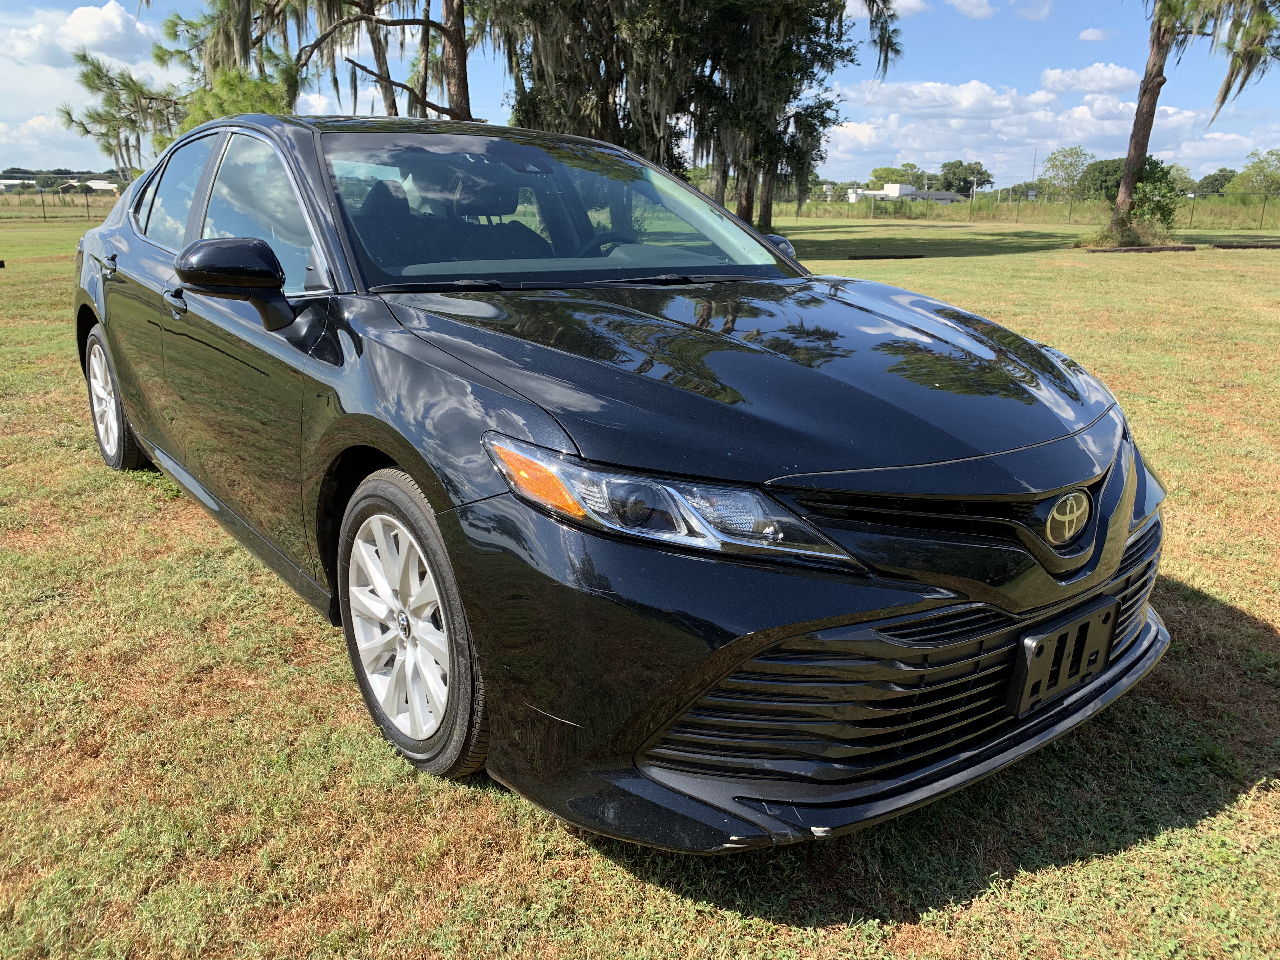 Used 2018 Toyota Camry XLE Auto (Natl) for Sale in Lakeland FL 33803